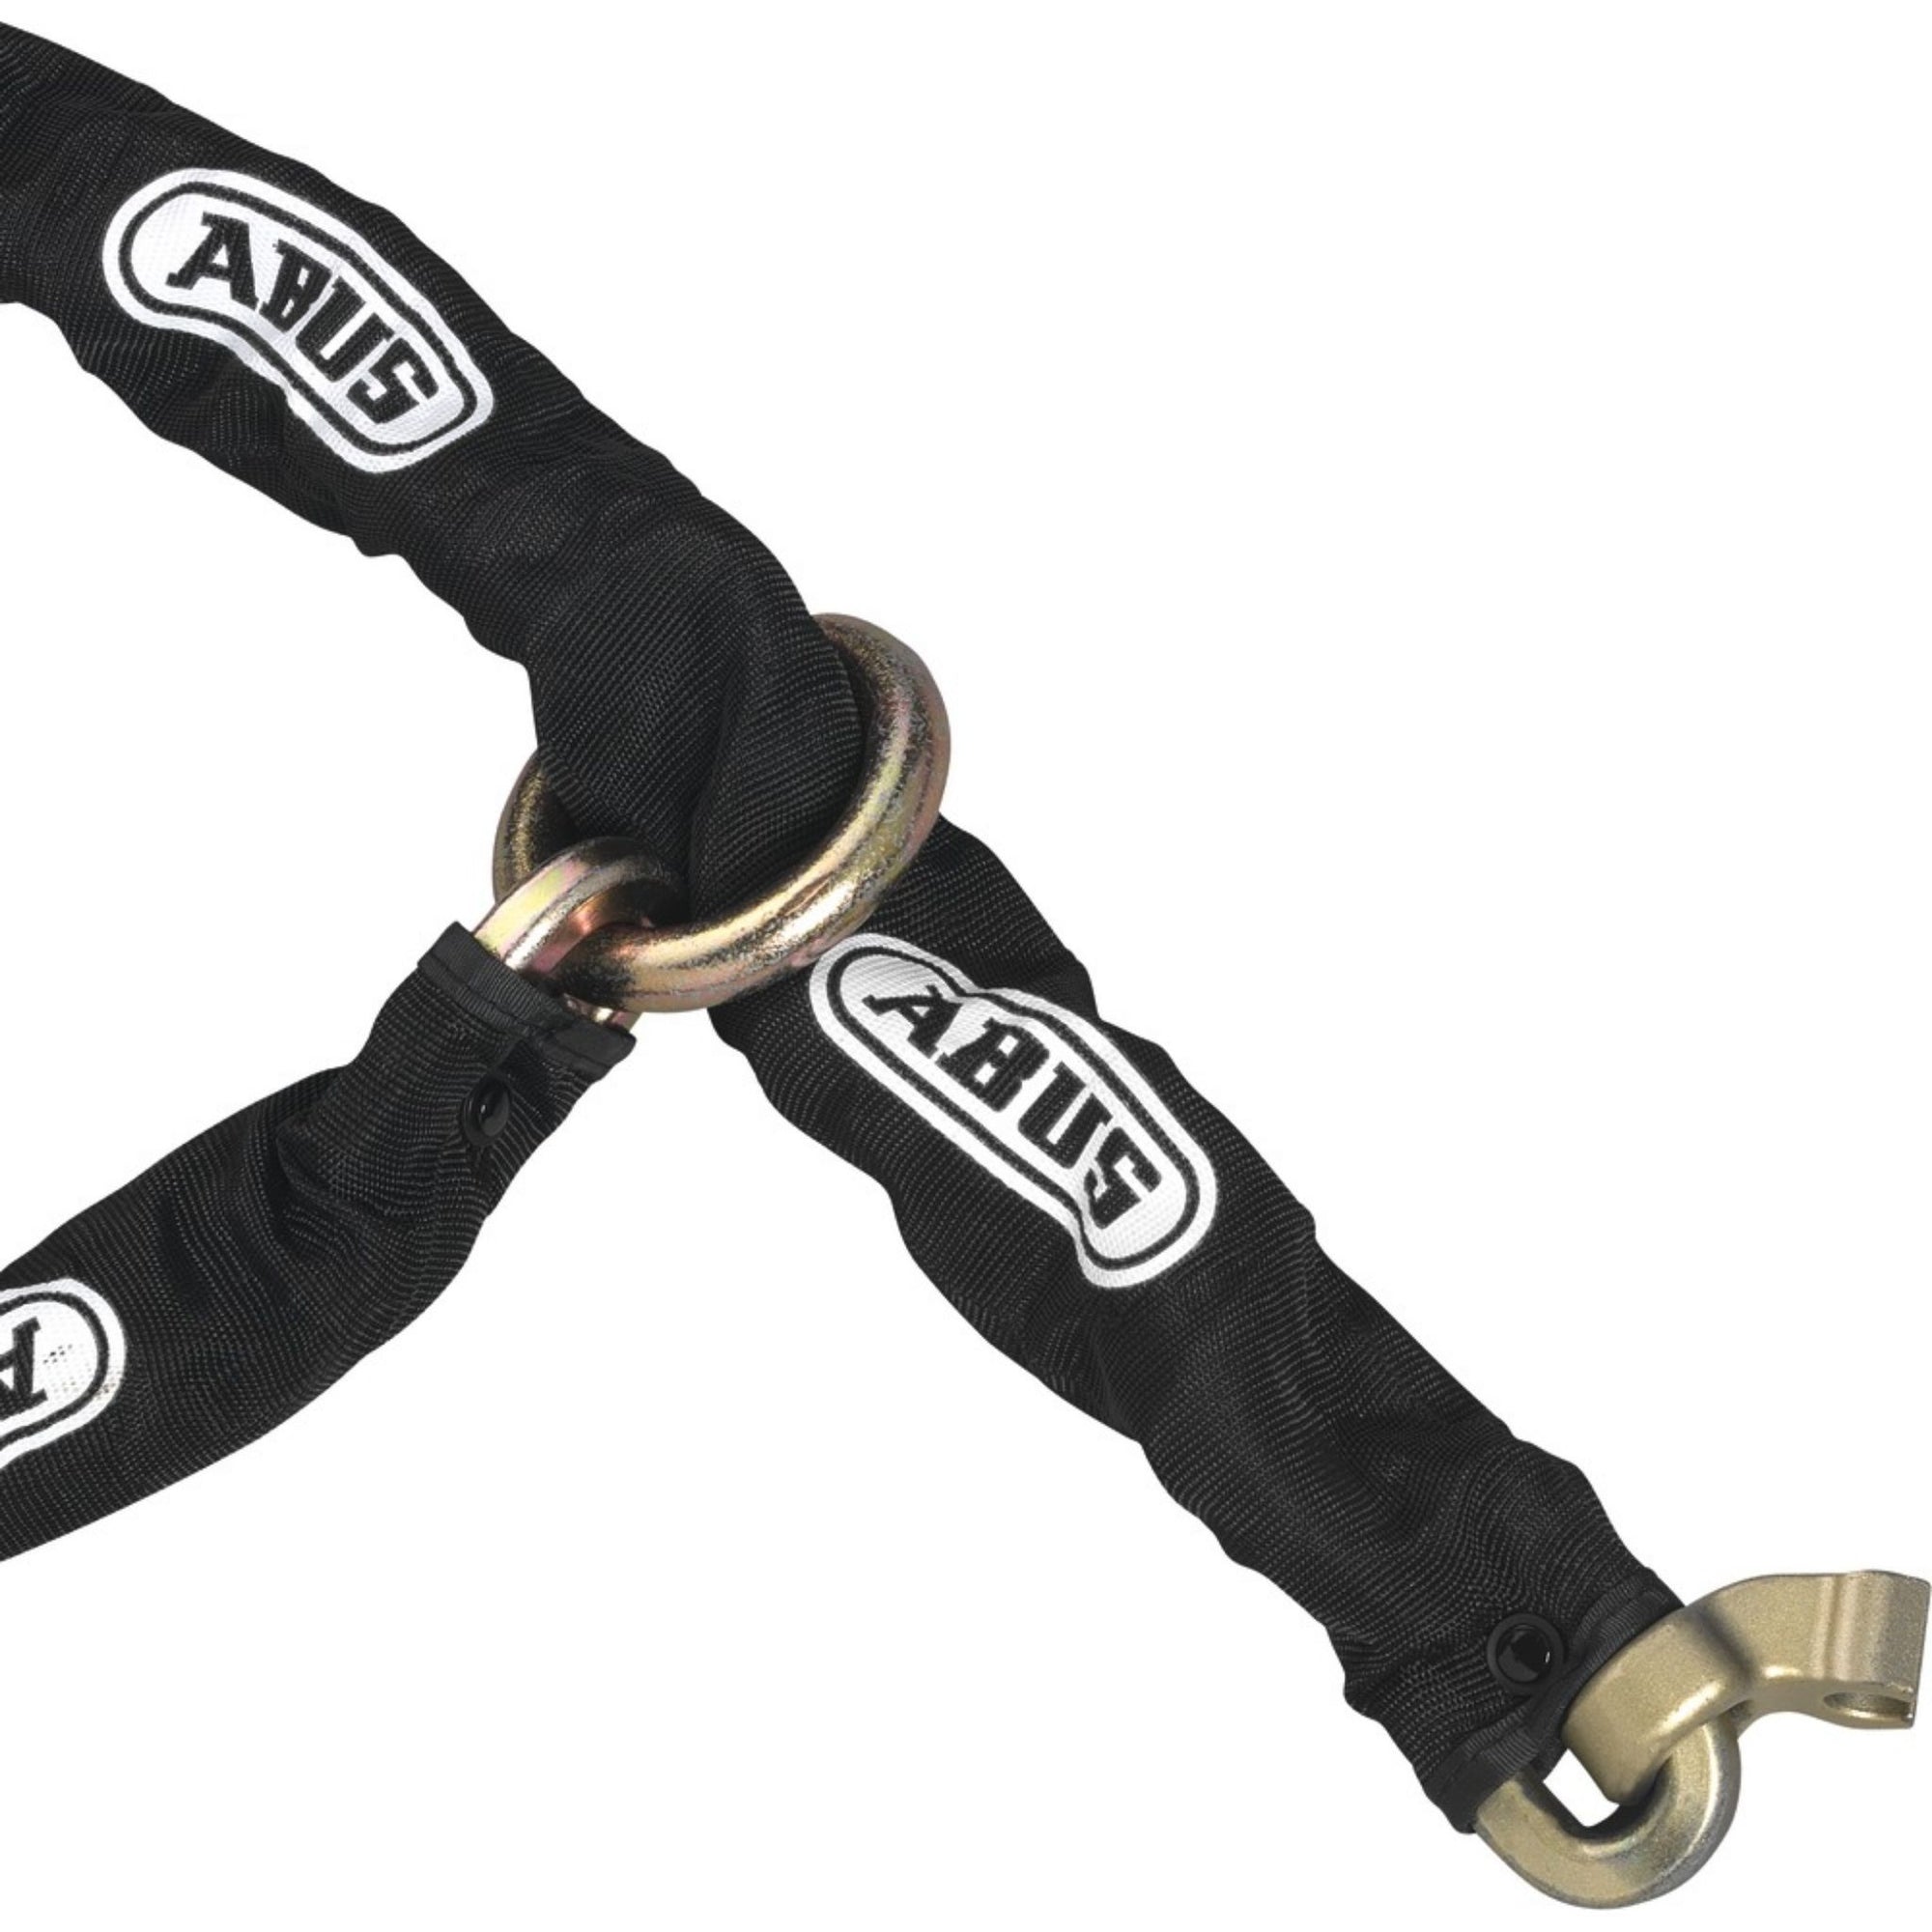 Abus 8-Foot Pre-Cut Chain with Loop & Fitted Sleeve, 1/2" Thick Chains (12KS) - The Lock Source